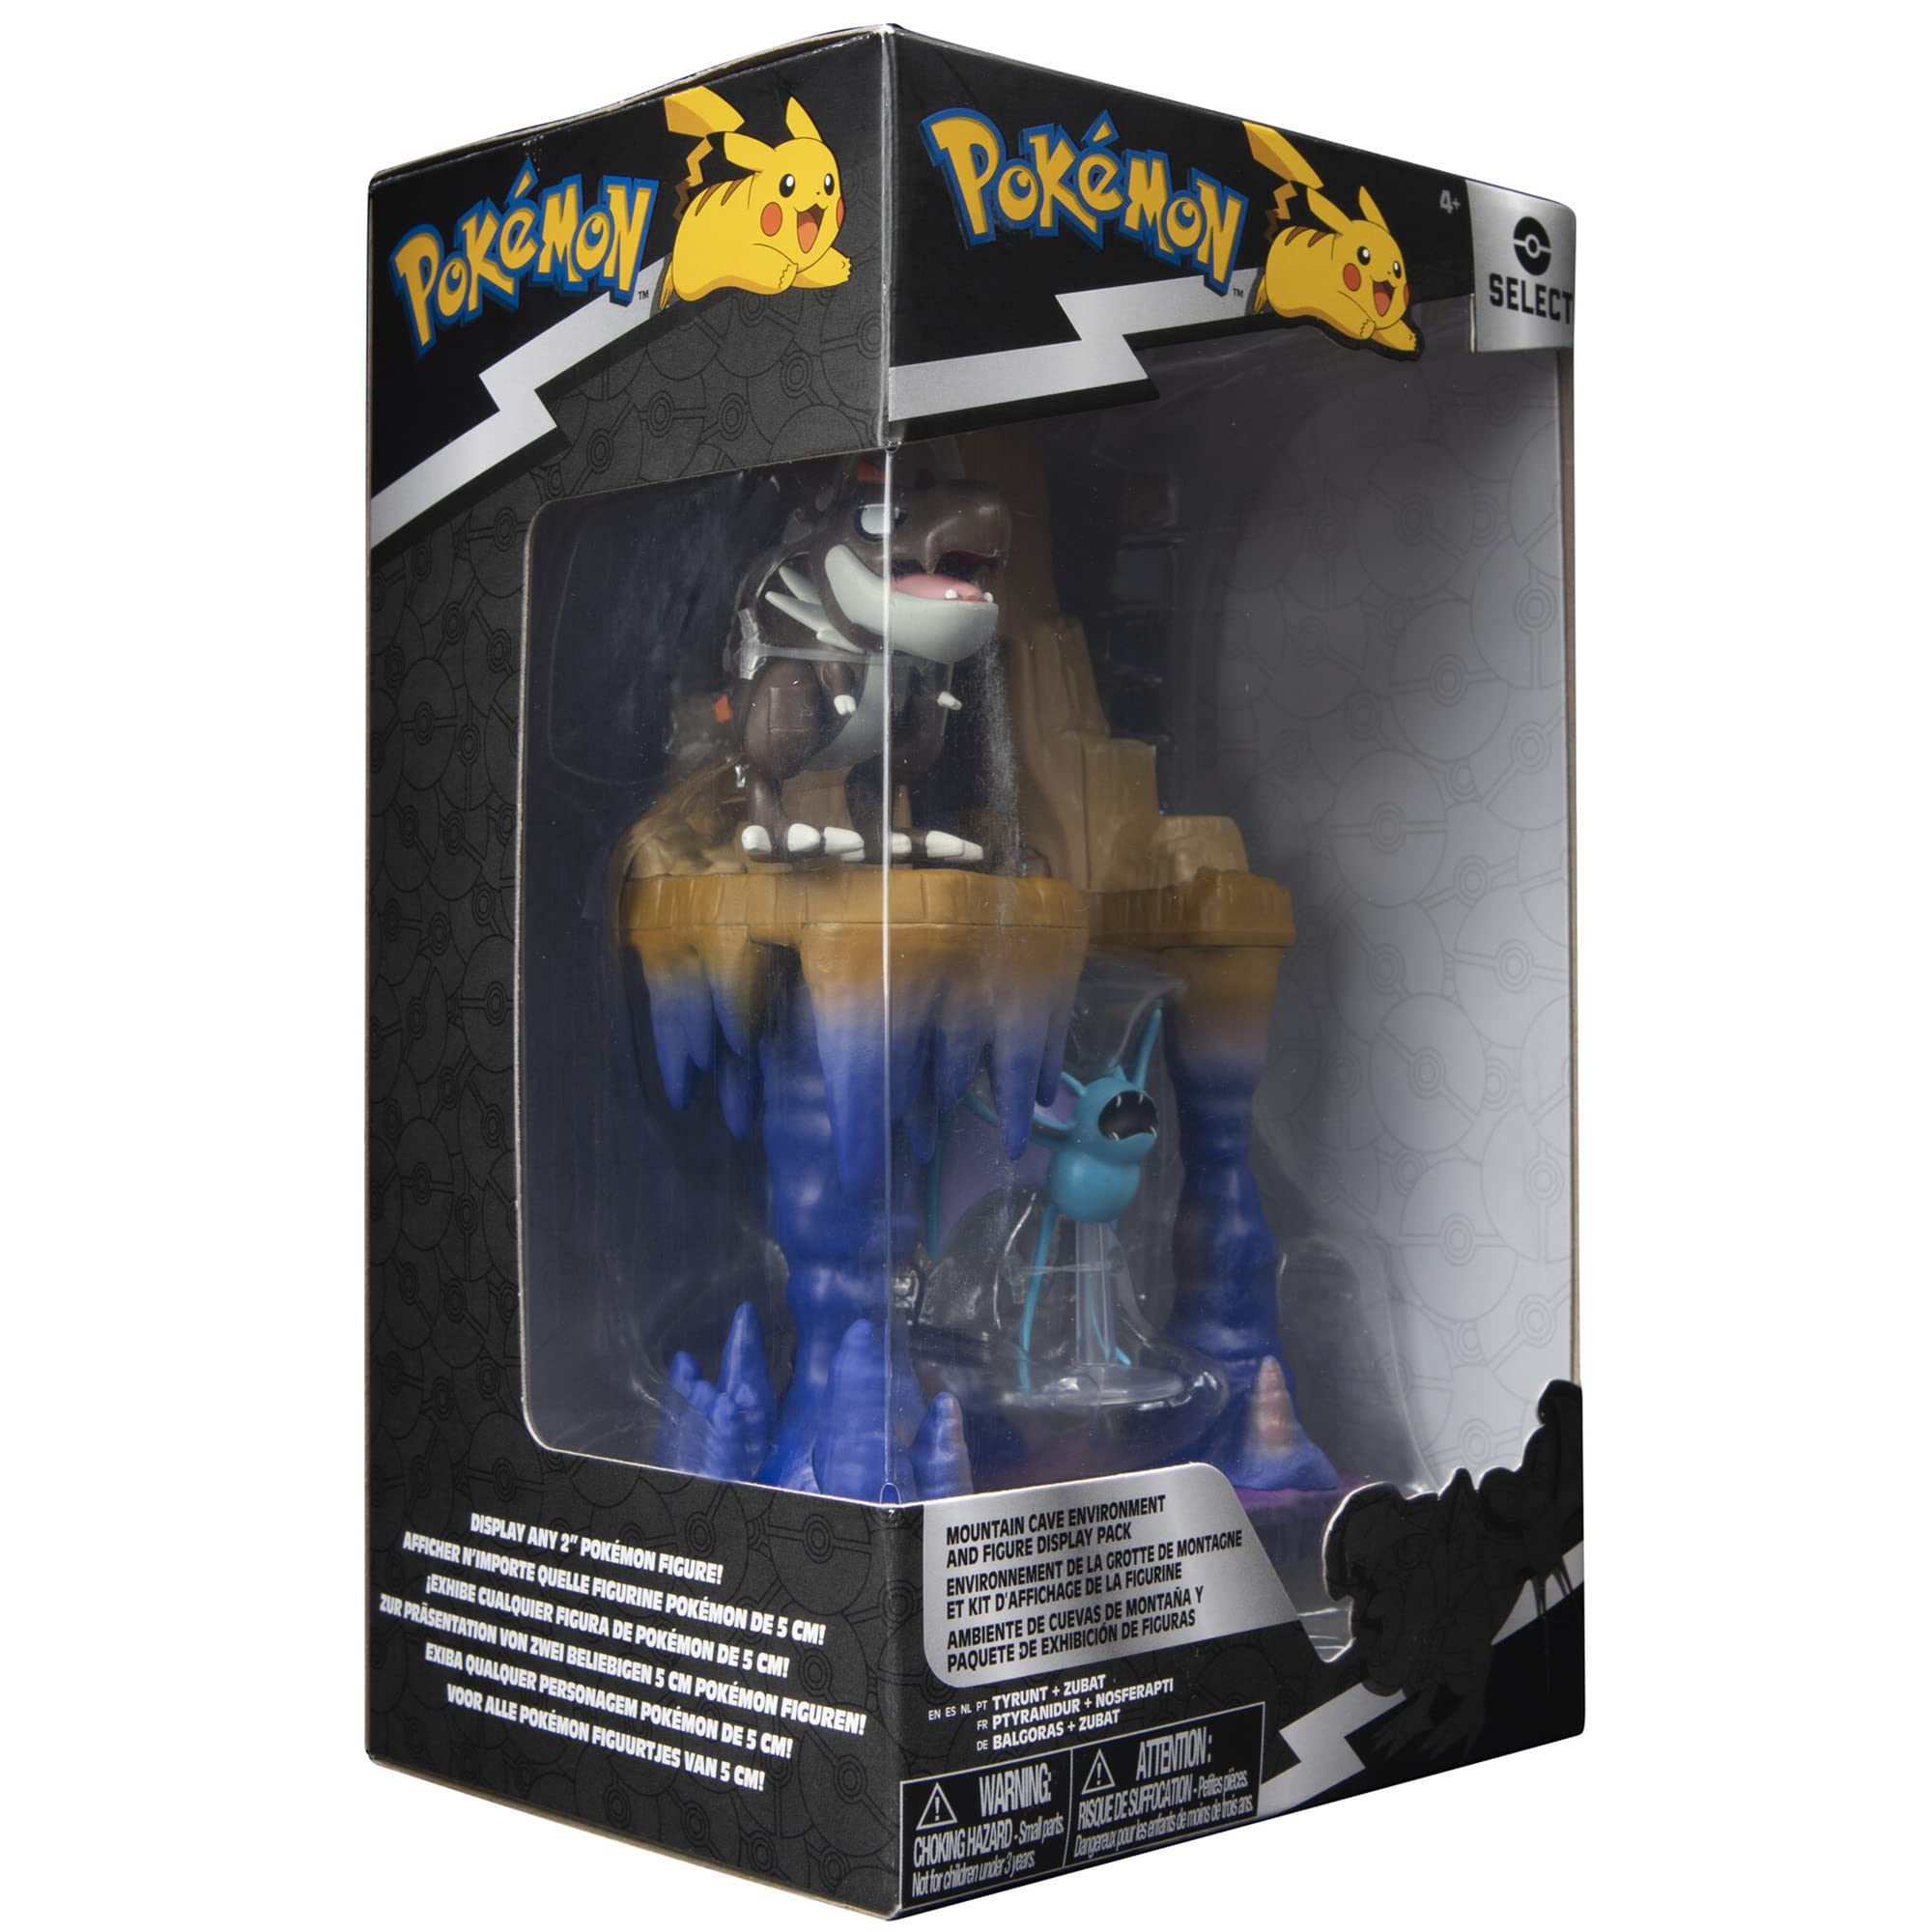 Pokemon Dragon-type Select Mountain Cave Environment - Multi-Level Display Set with 2-Inch Tyrunt and Zubat Battle Figures